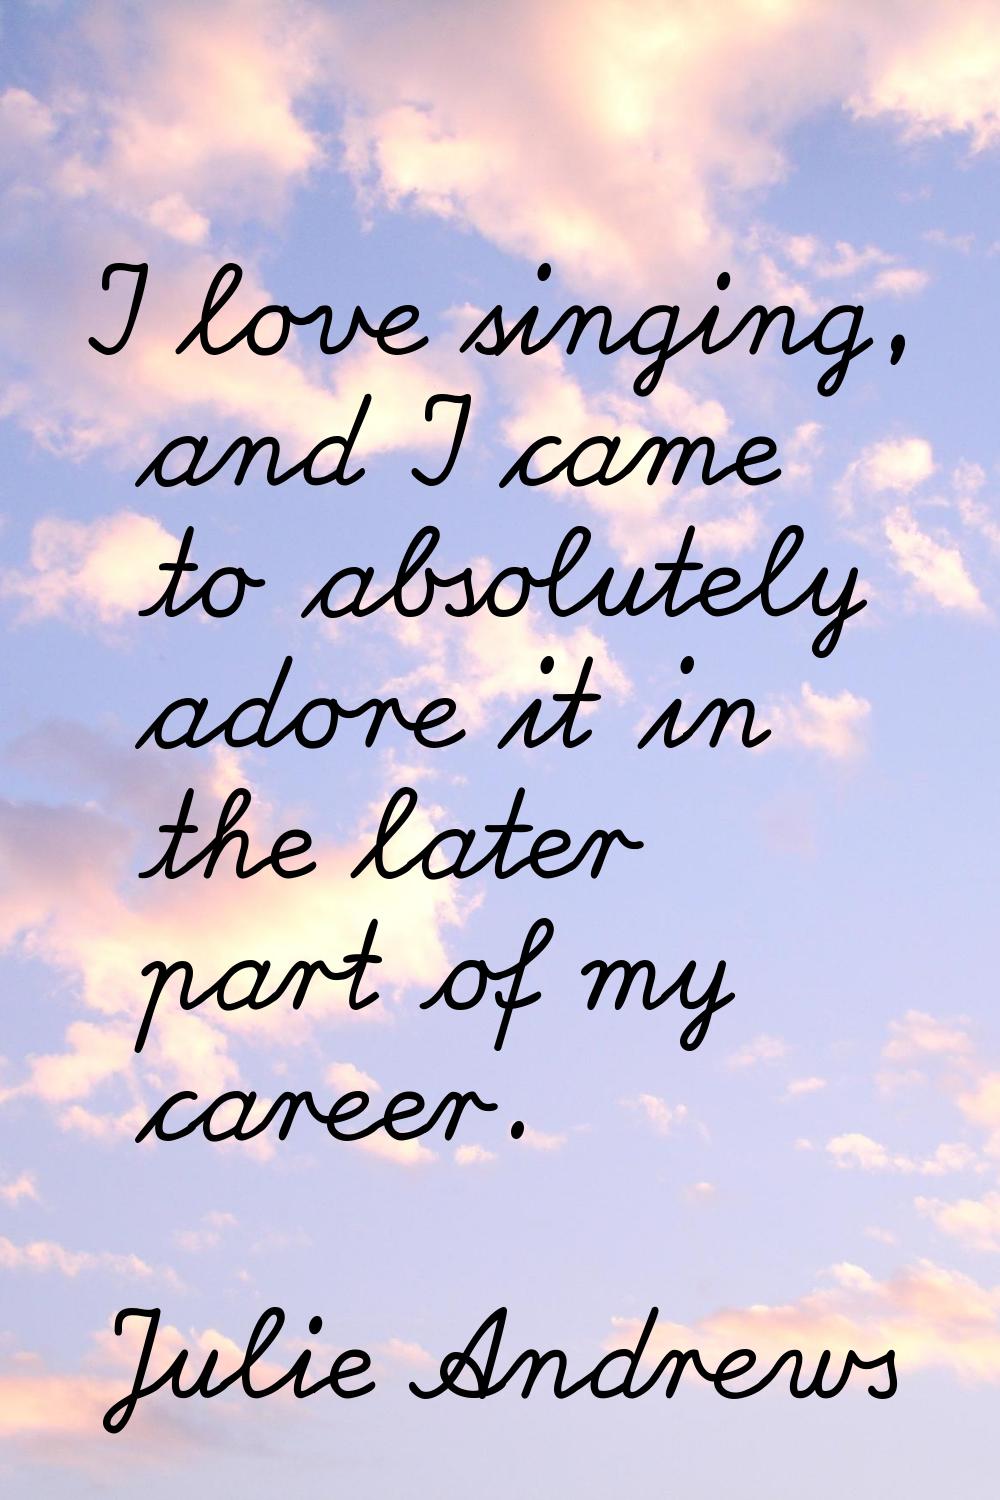 I love singing, and I came to absolutely adore it in the later part of my career.